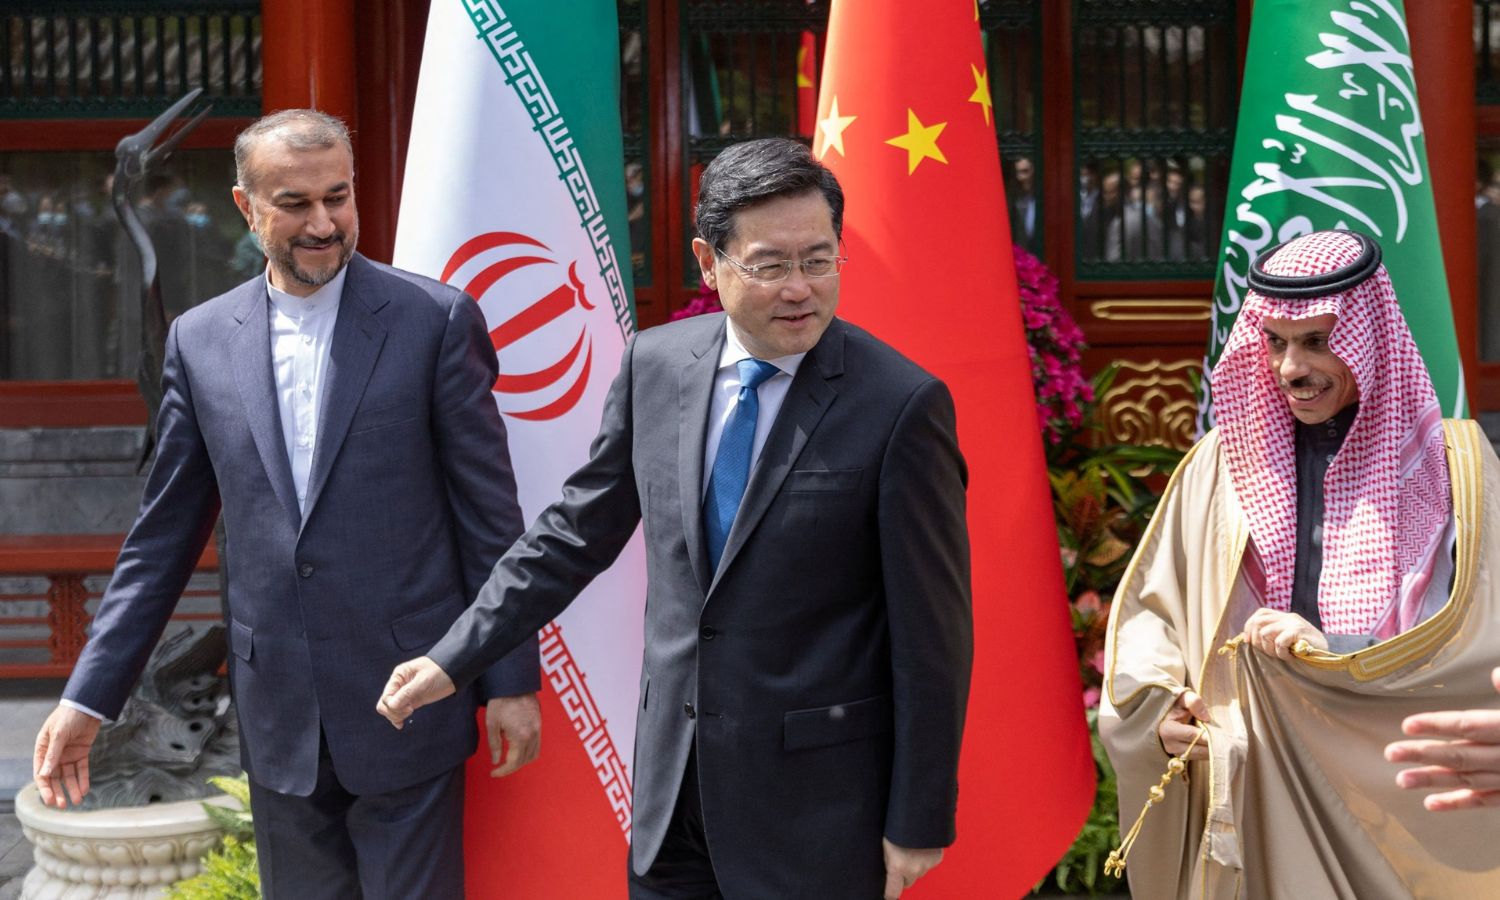 Iranian Foreign Minister Hossein Amir Abdollahian, Saudi Foreign Minister Prince Faisal bin Farhan Al Saud and Chinese Foreign Minister Qin Gang in Beijing - April 6, 2023 (Reuters)